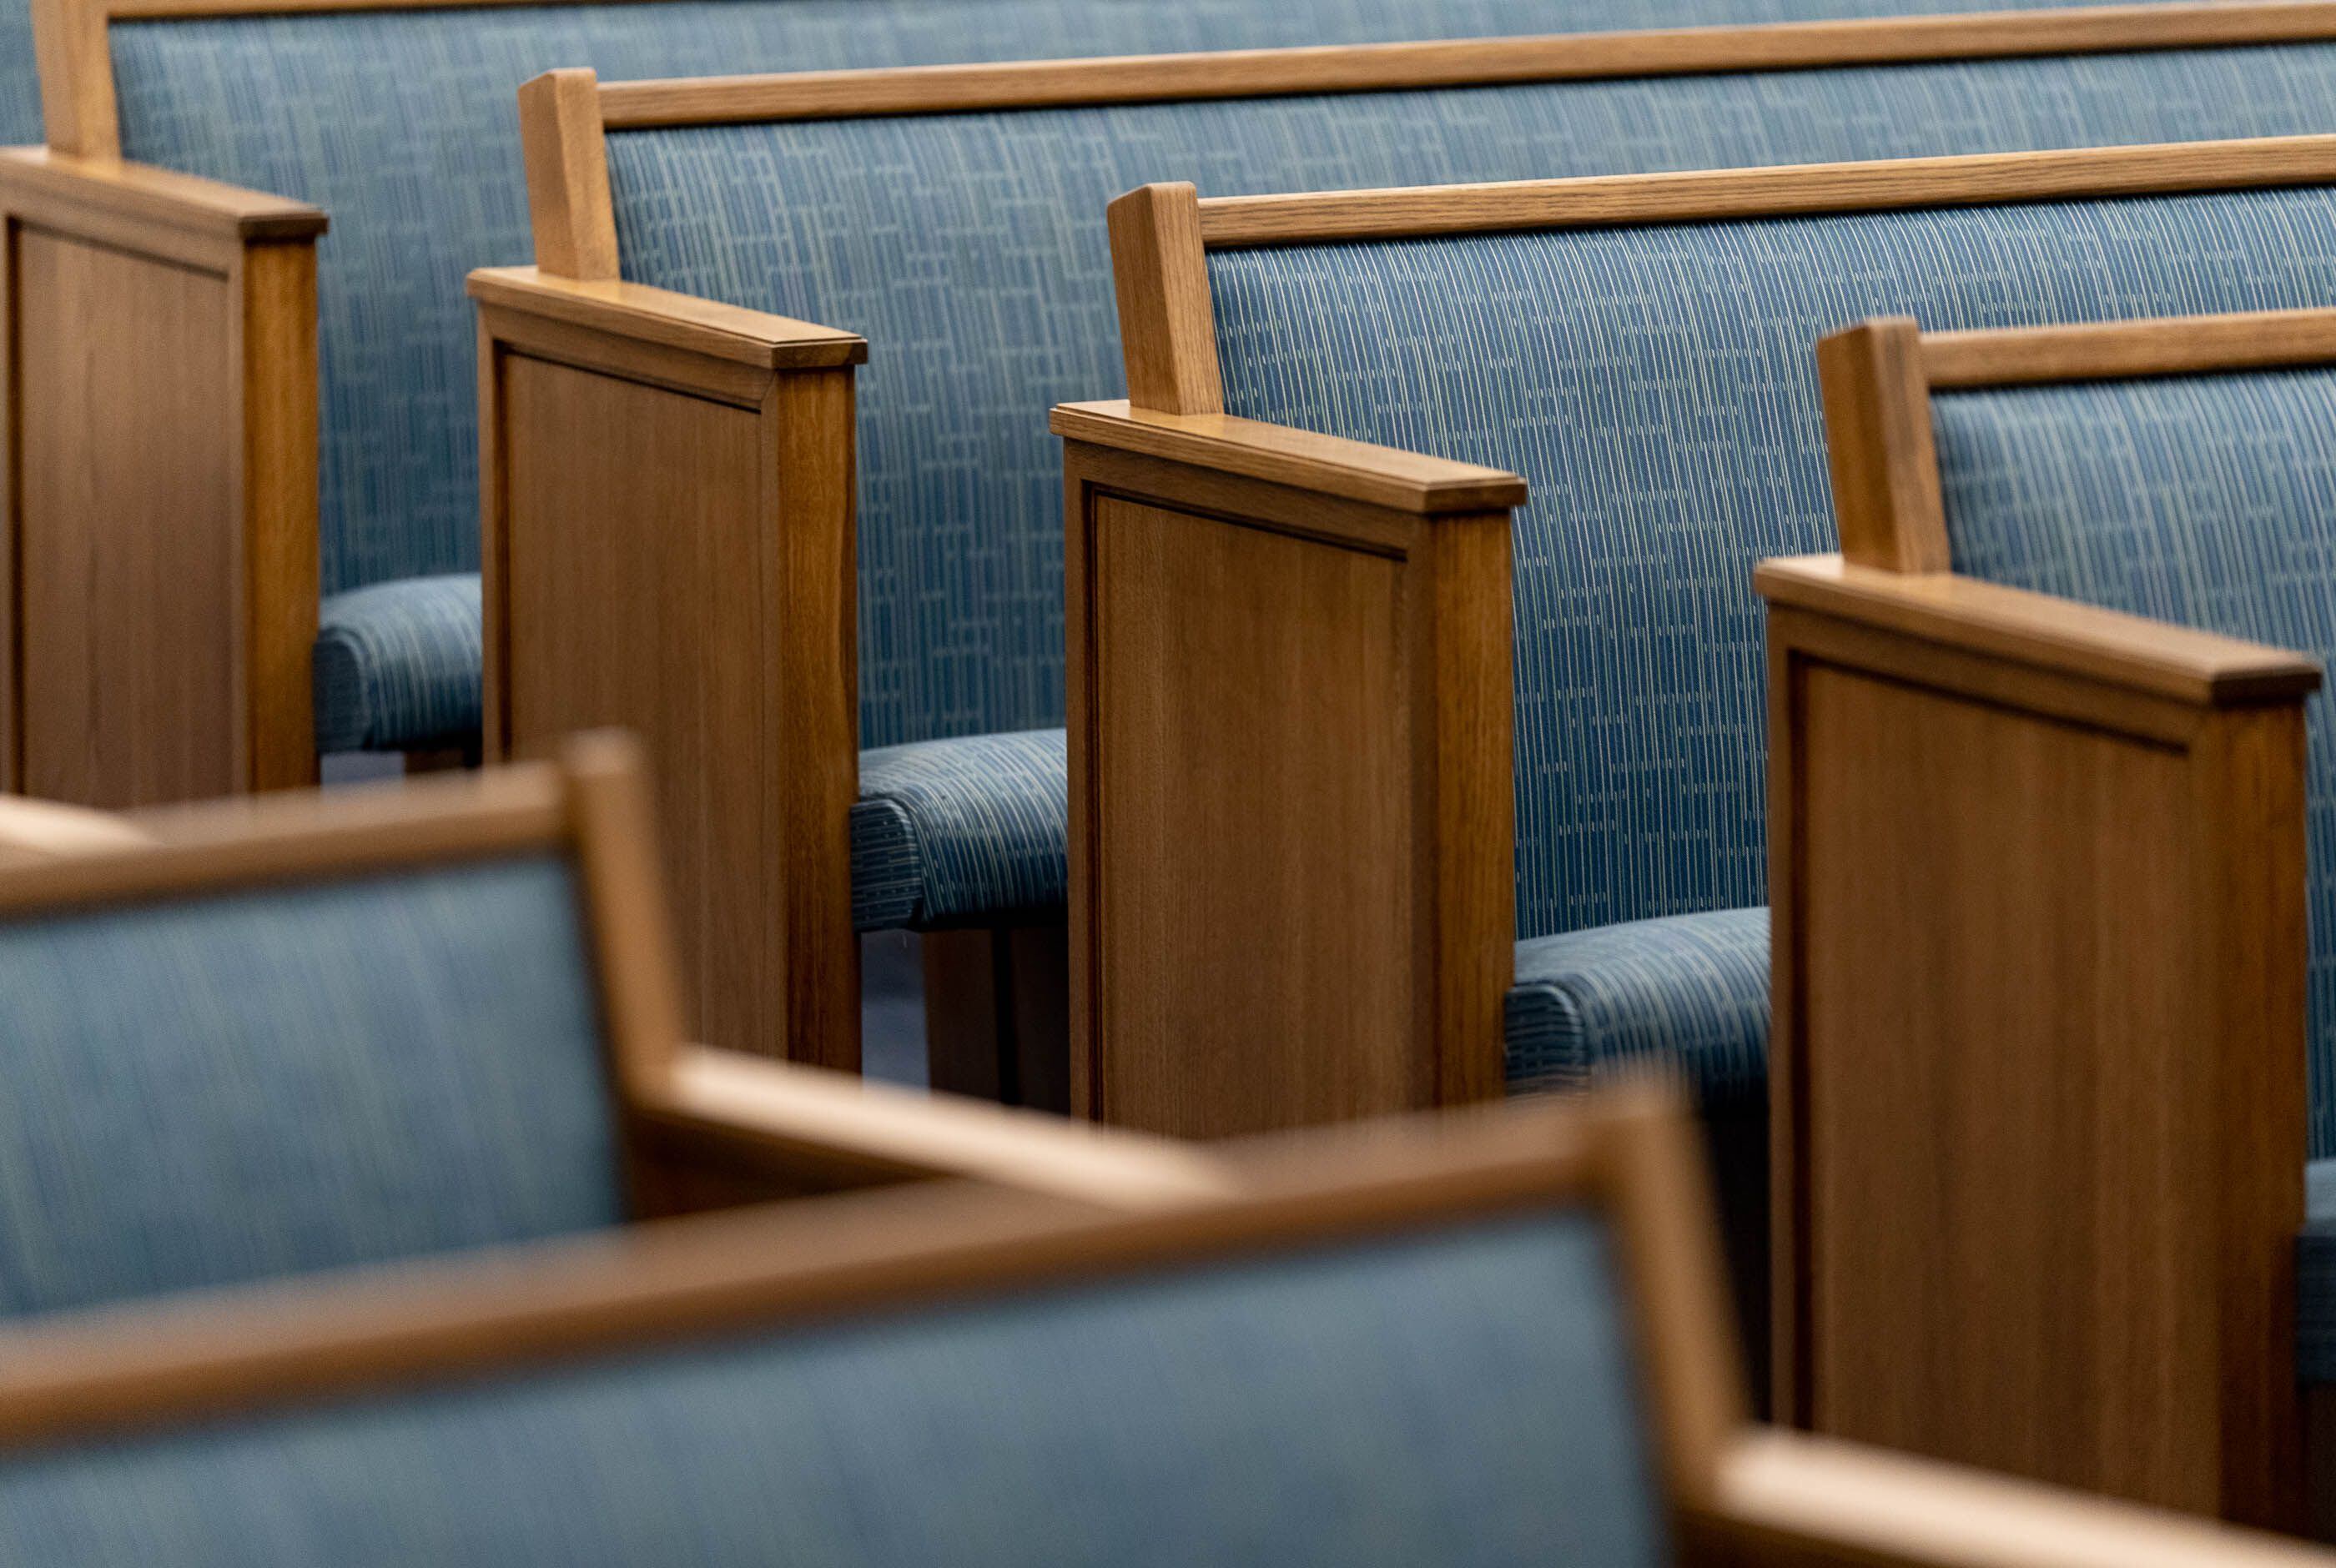 (Francisco Kjolseth | The Salt Lake Tribune) Pews in one of the two chapels at the 95 State meetinghouse of The Church of Jesus Christ of Latter-day Saints in 2022. The number of Latter-day Saint congregations in the U.S. declined by 21 units in 2023.